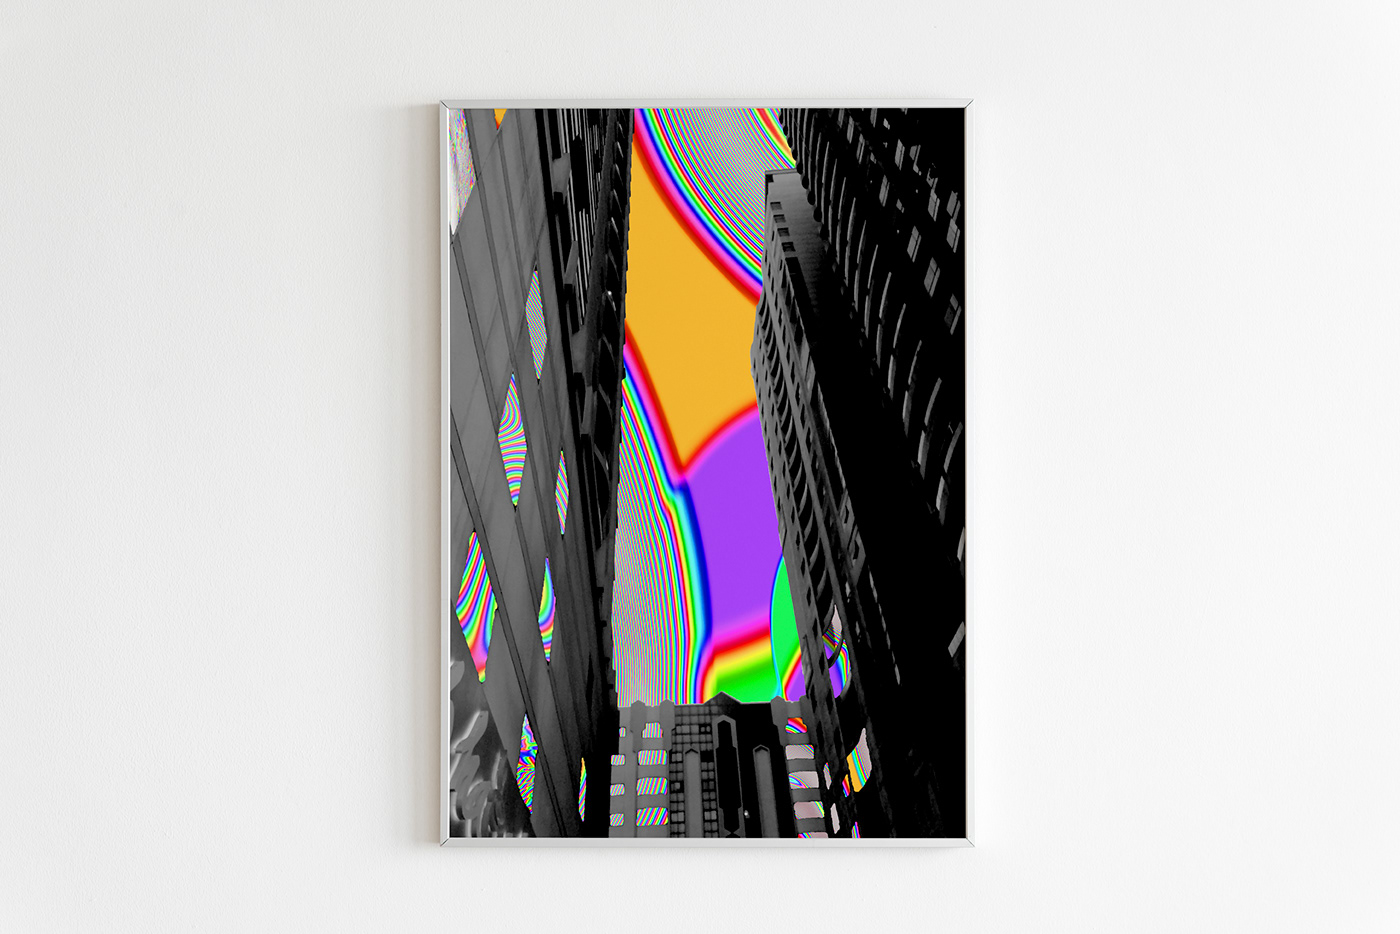 buildingcollage collage Collageart holographic liquify art music design Photography  Poster Design